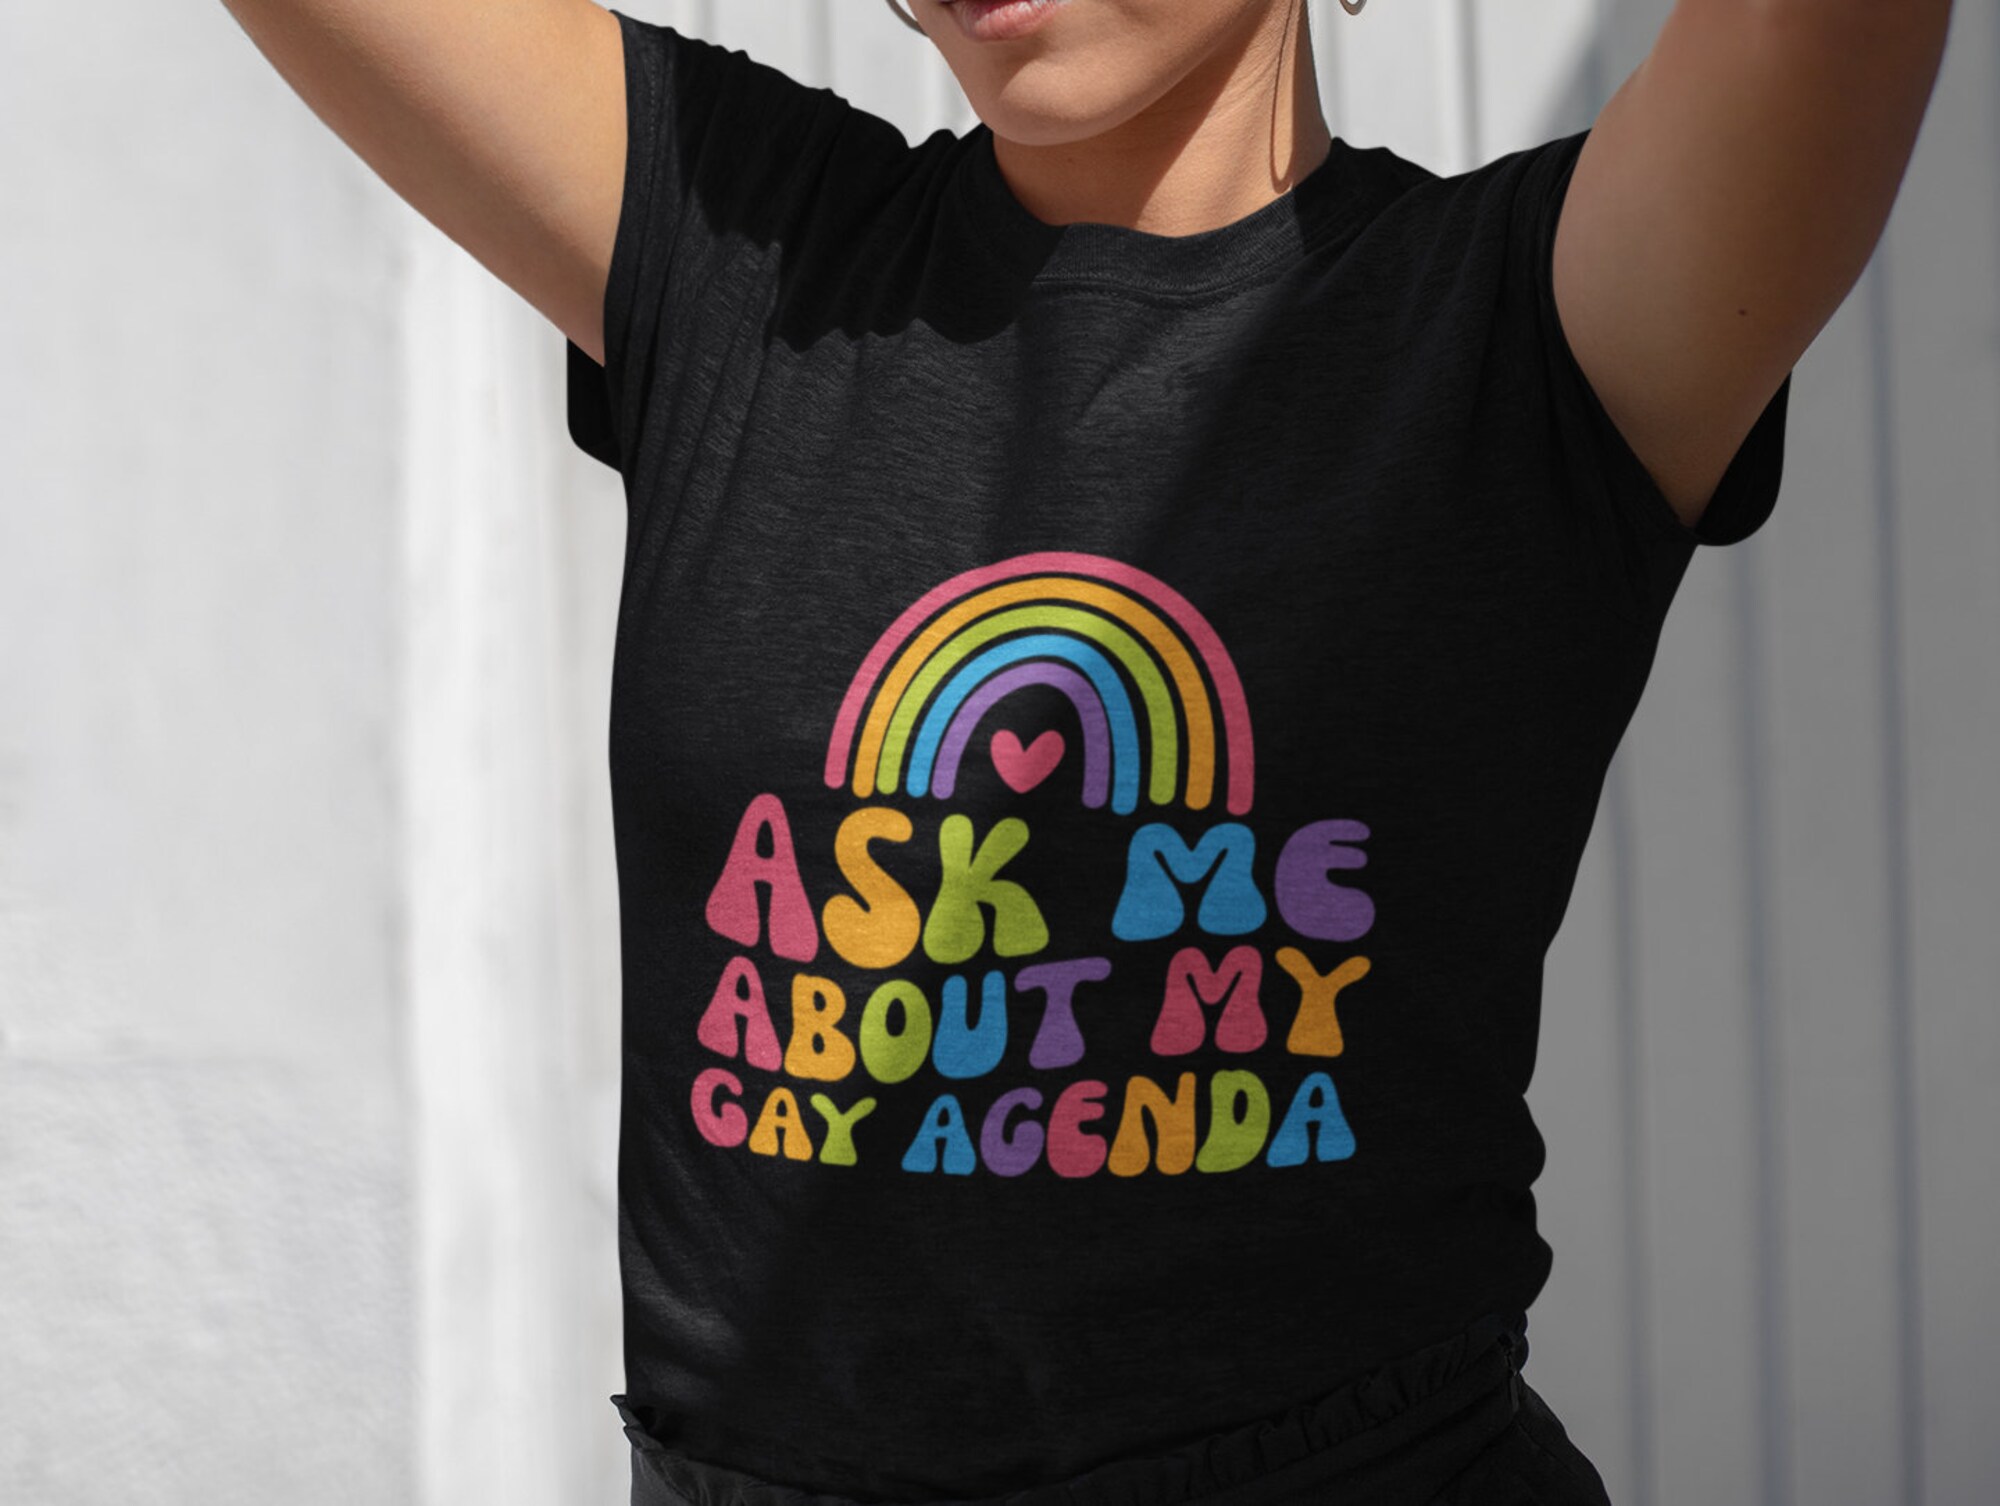 Discover Funny LGBT Shirt - Ask Me About My Gay Agenda Unisex T-Shirt